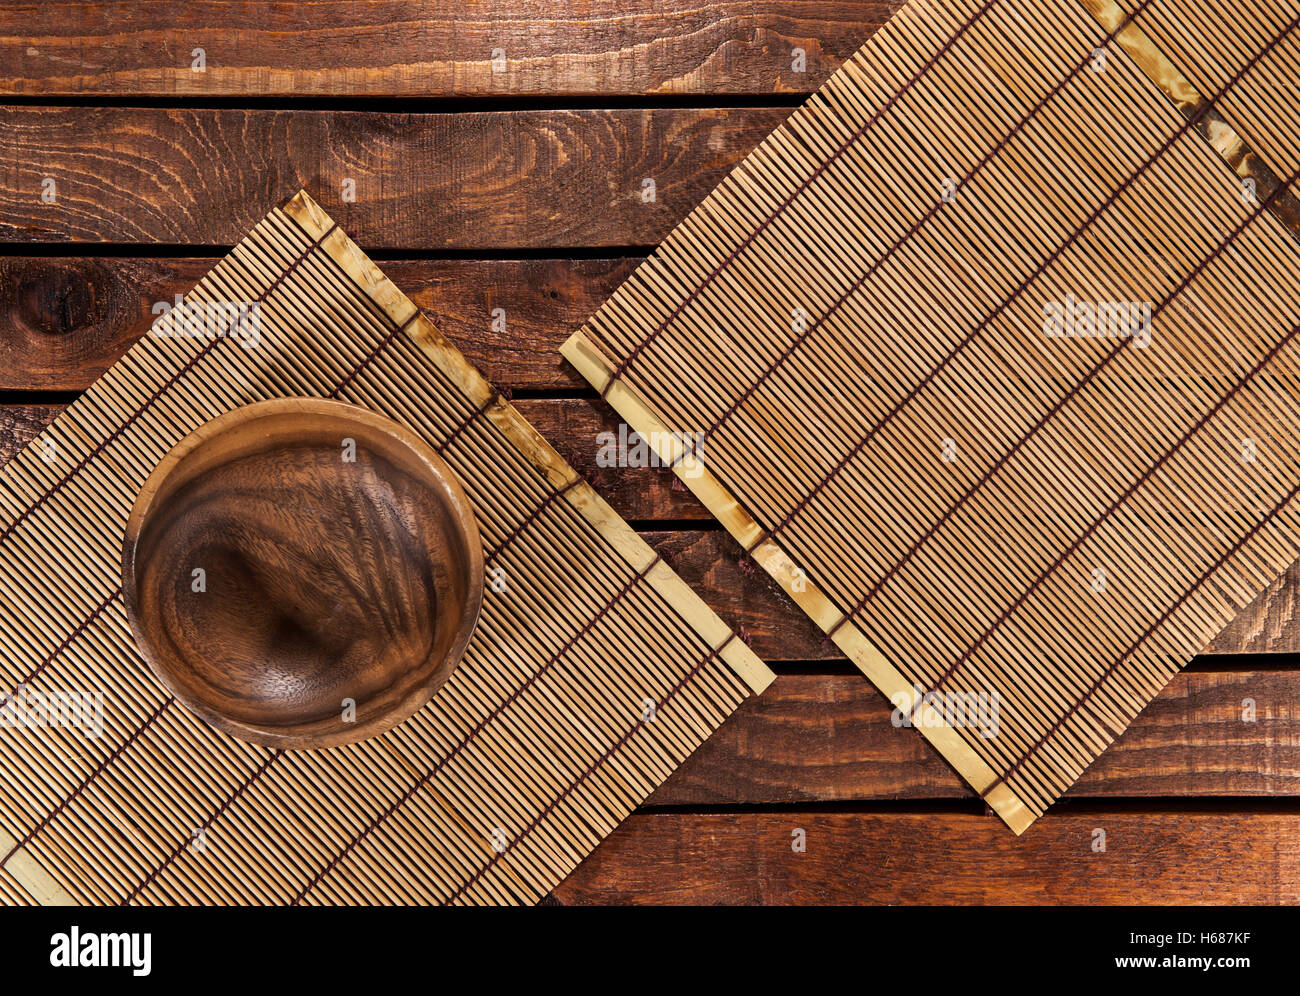 Bamboo mat on wooden table. Top view Stock Photo